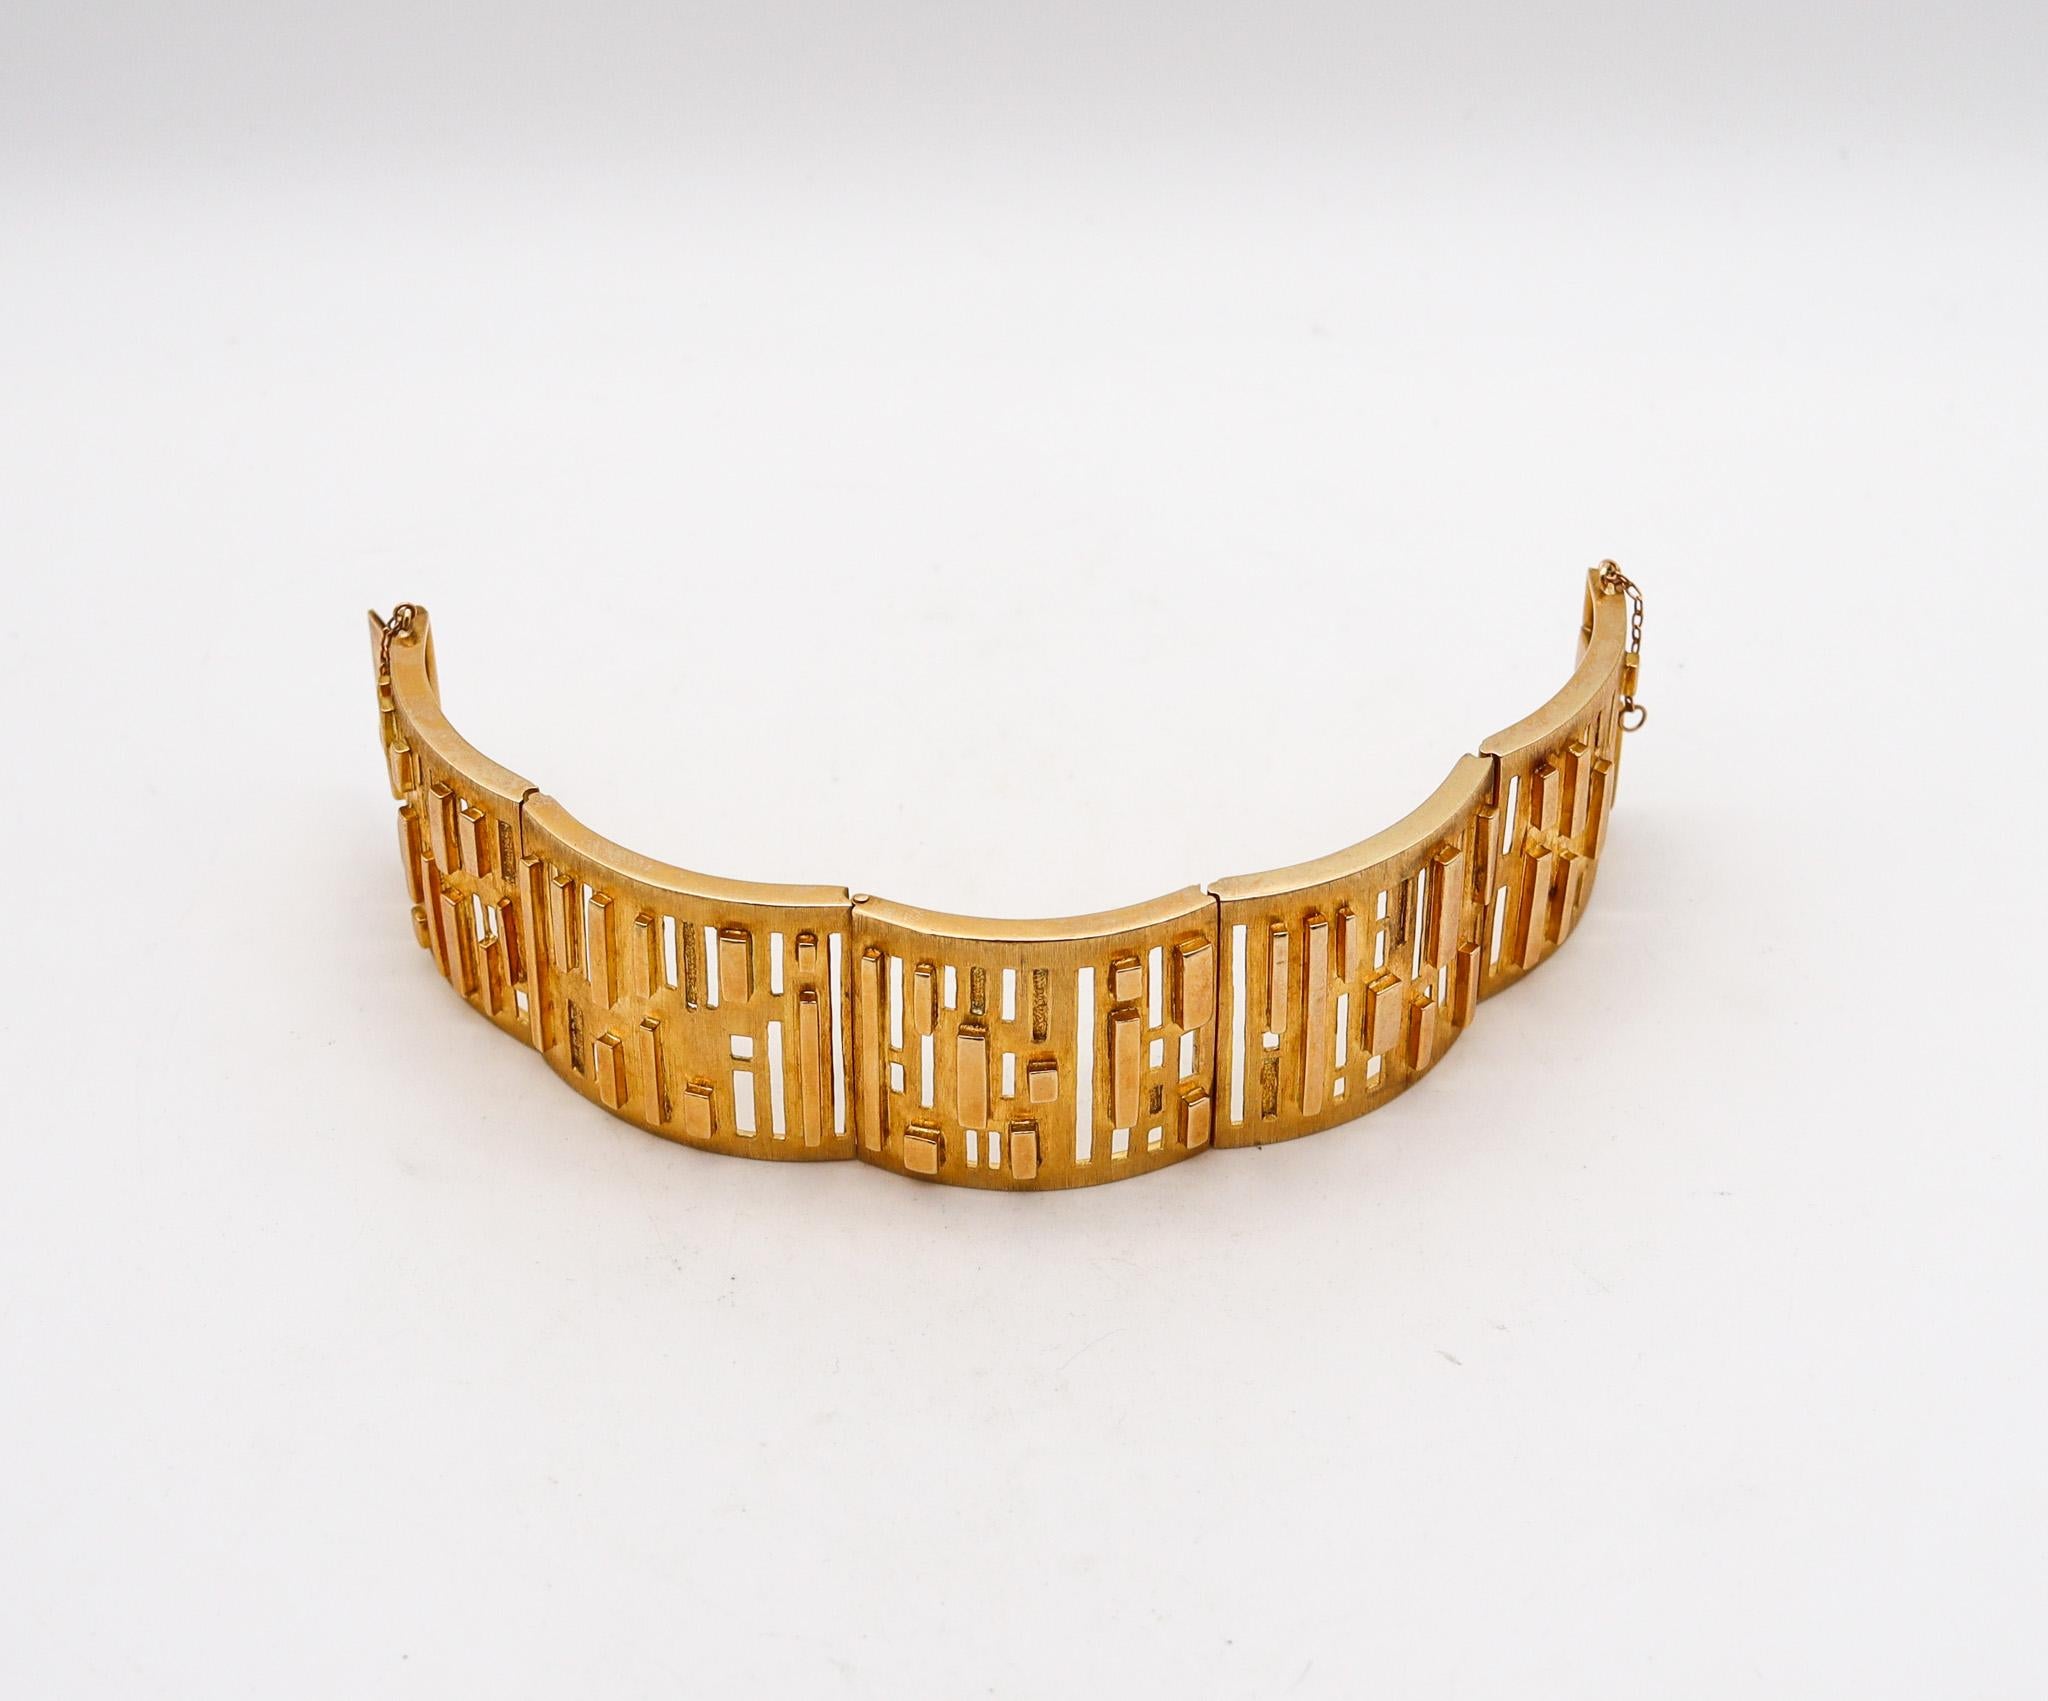 Burle Marx 1970 Geometric Concretism Art Bracelet In Solid 18Kt Yellow Gold 1